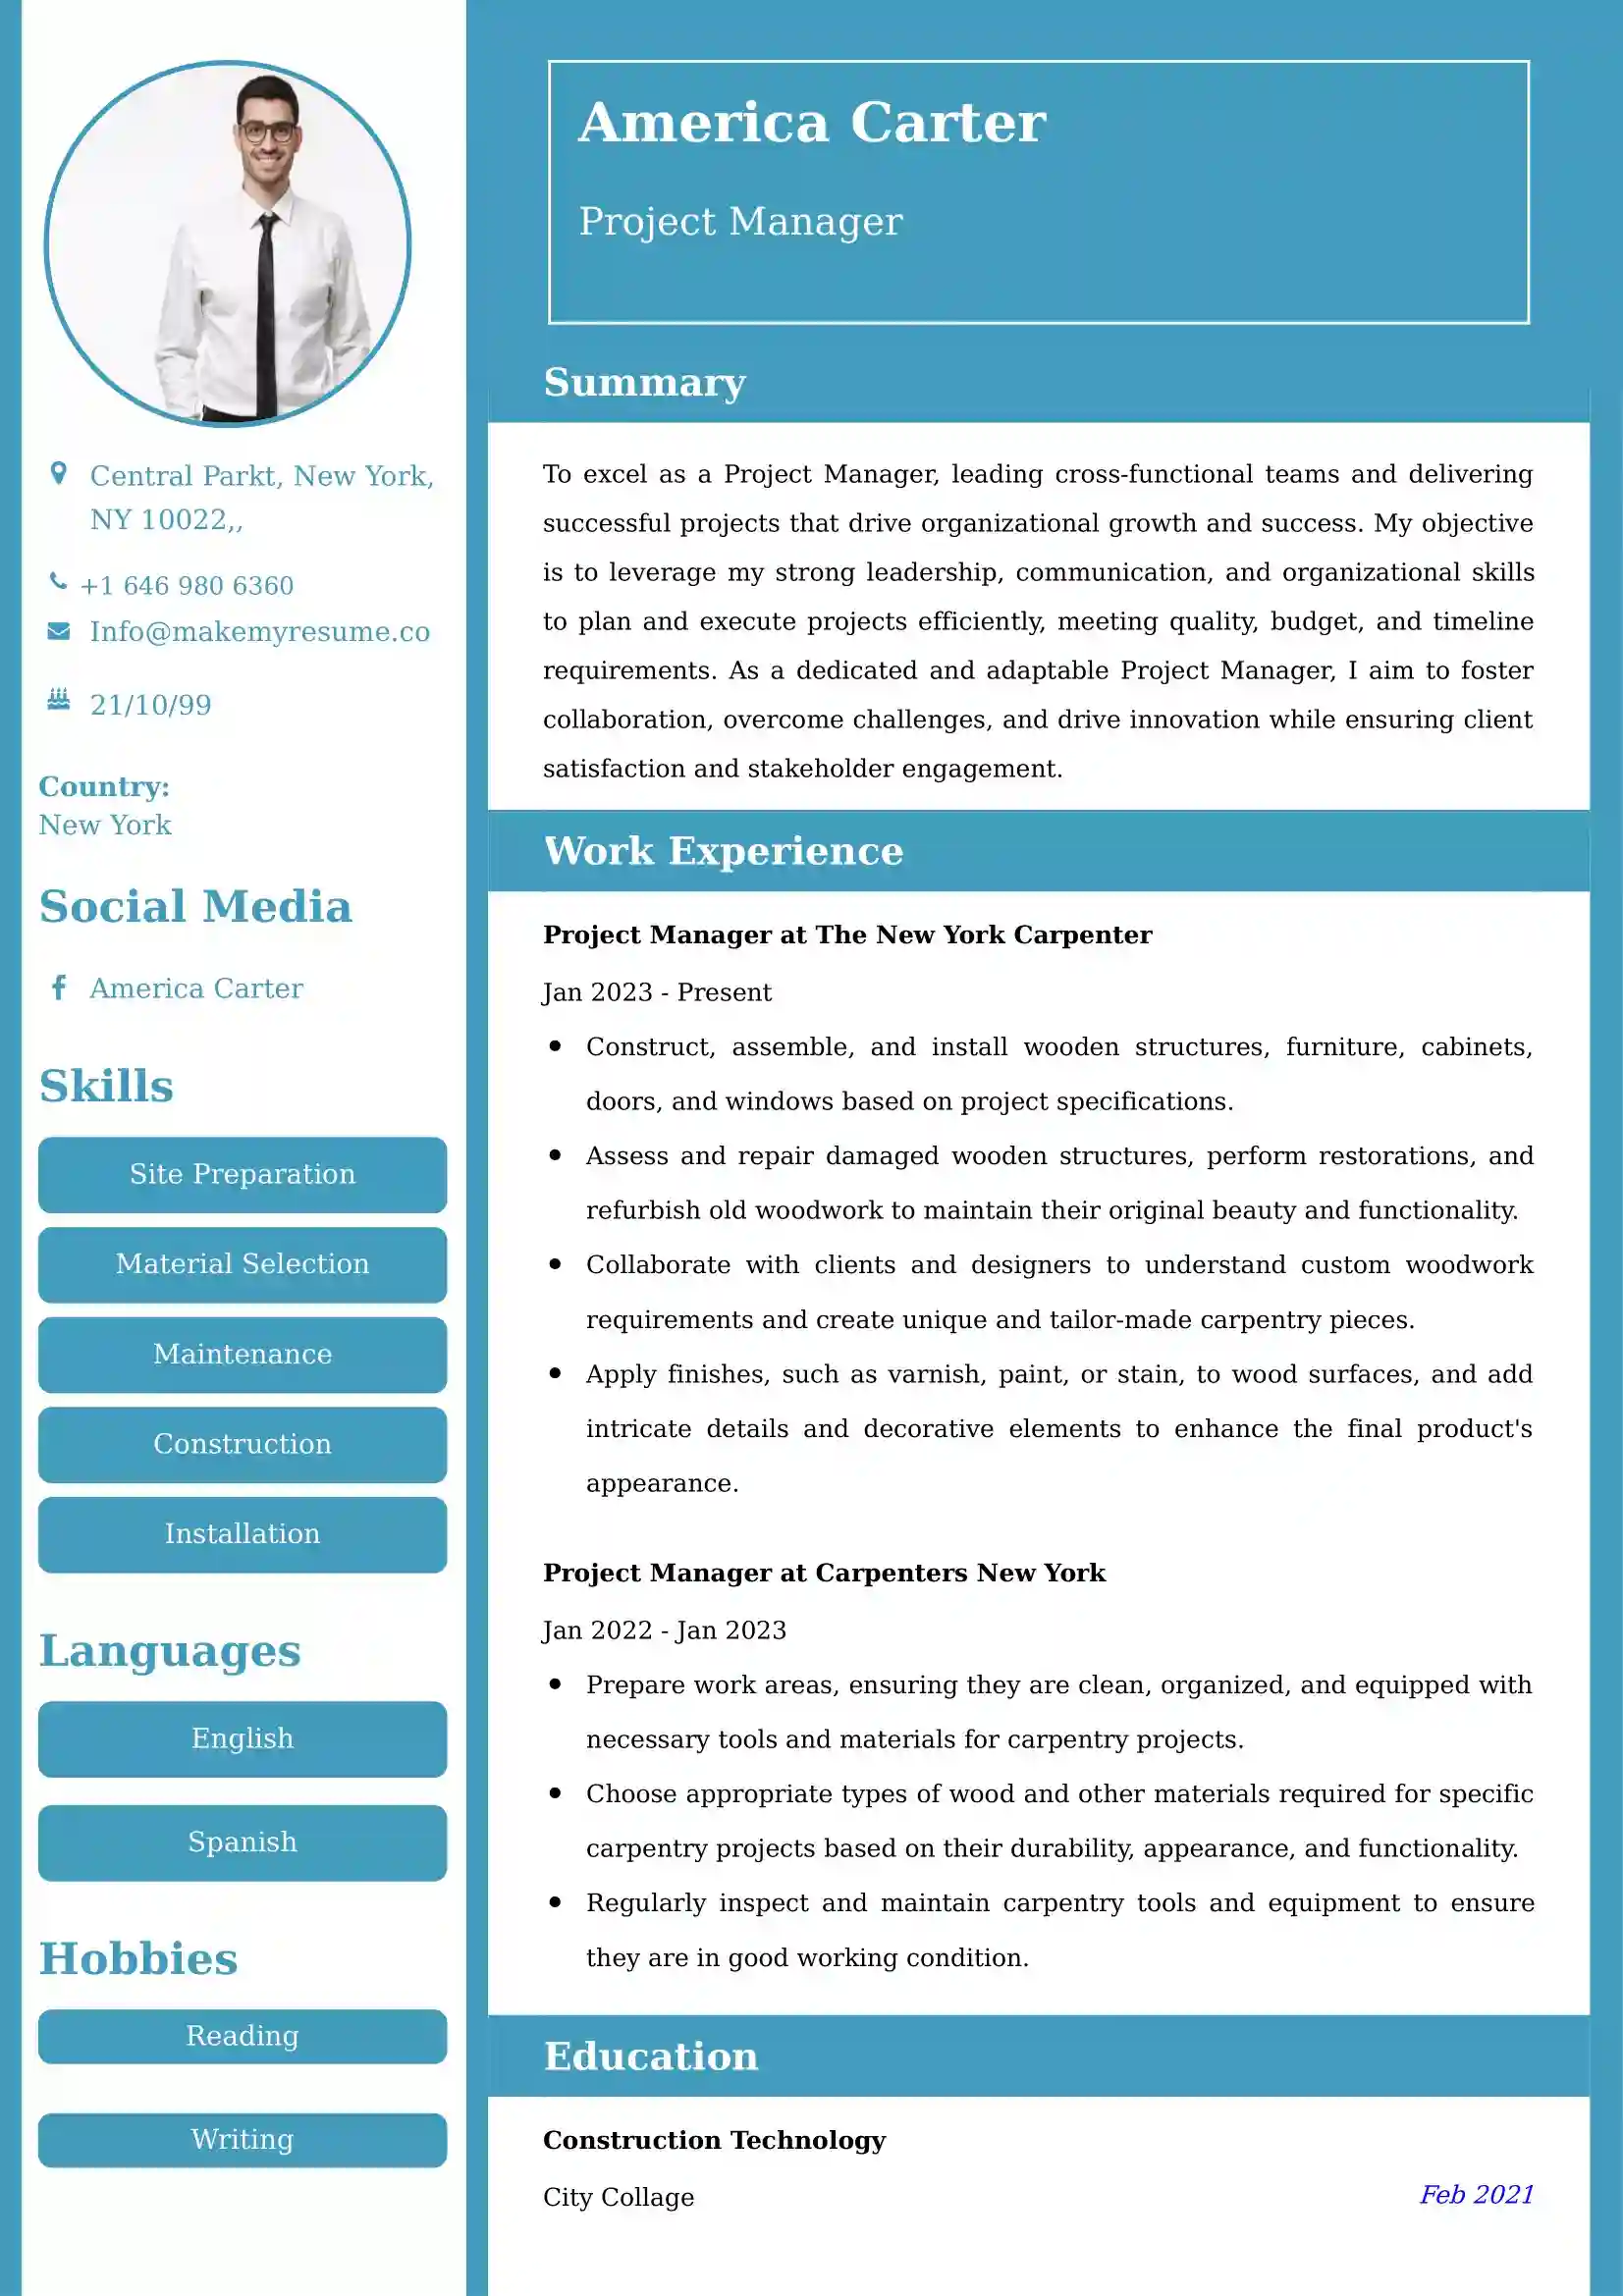 Project Manager Resume Examples for UK Jobs - Tips and Guide